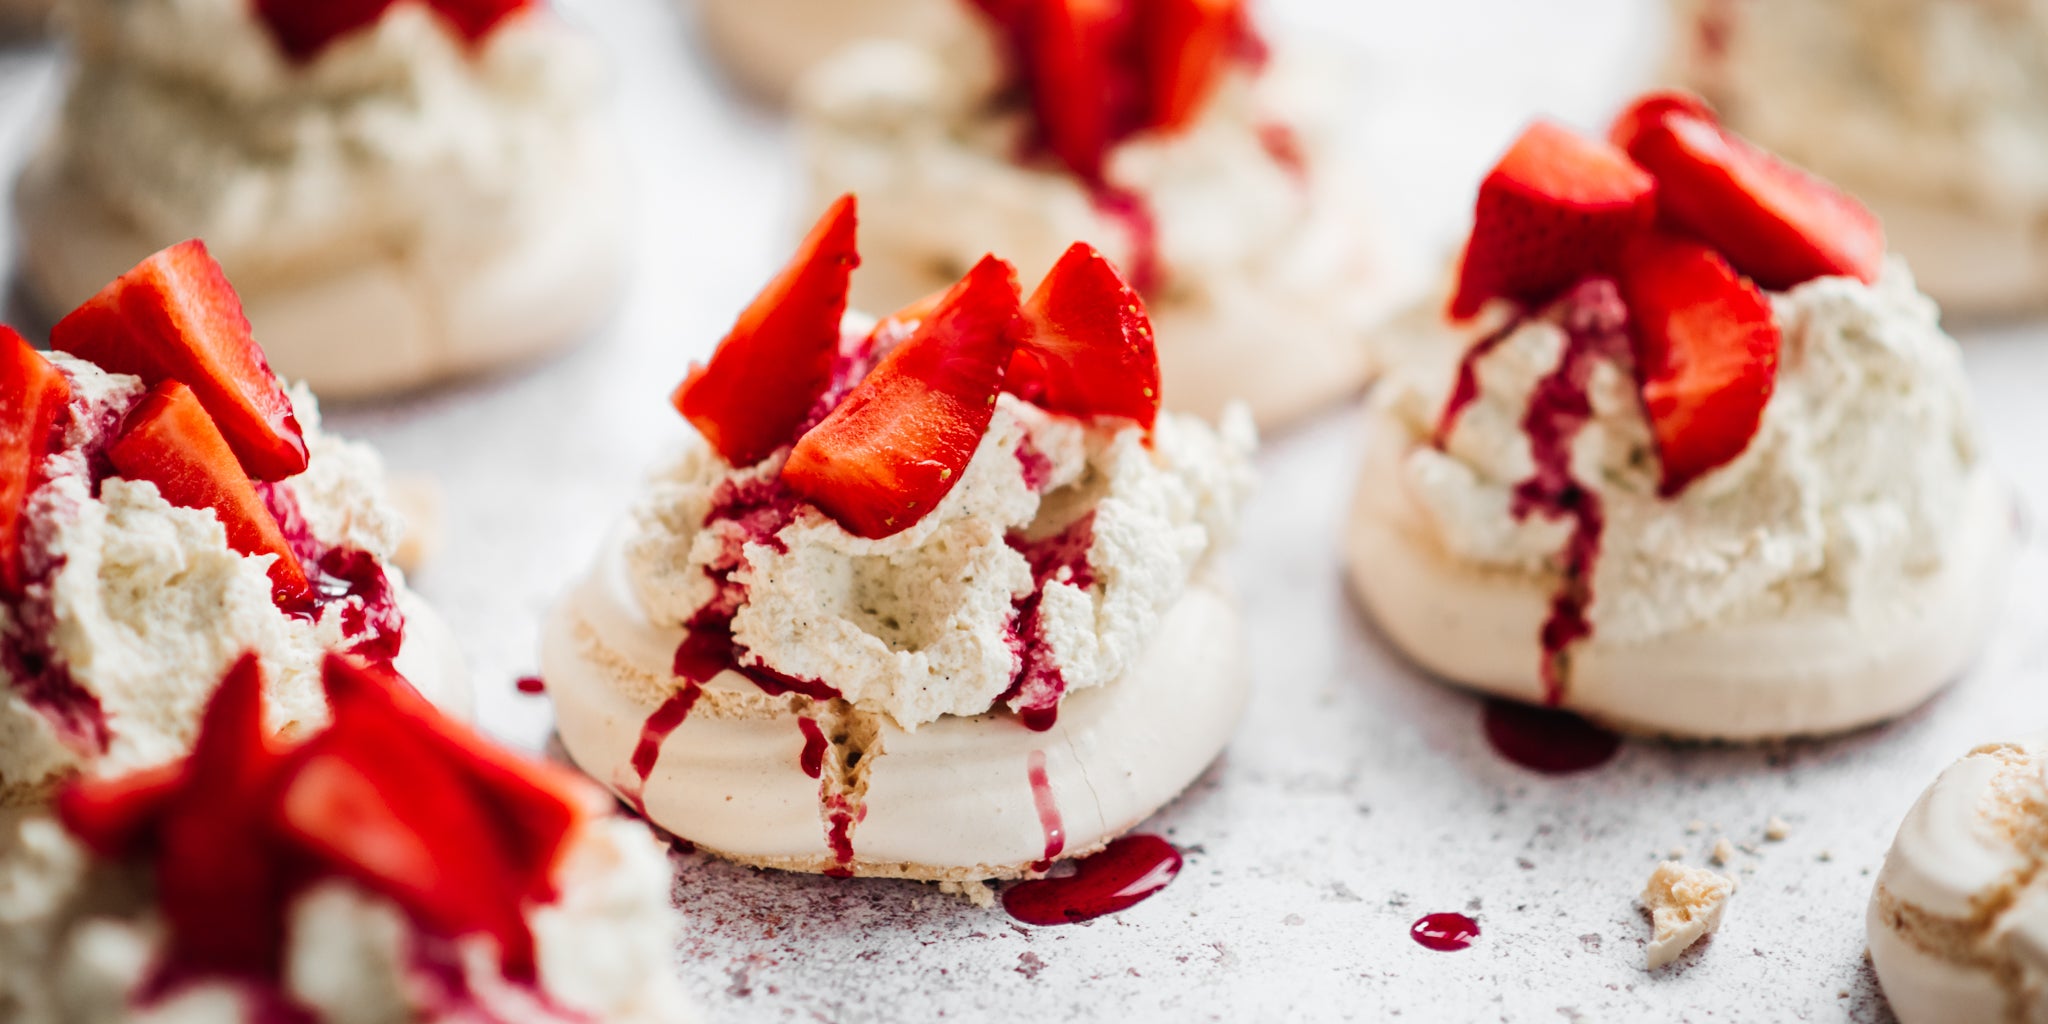 Three meringue nests topped with crushed meringues and strawberry slices and a drizzle of strawberry sauce